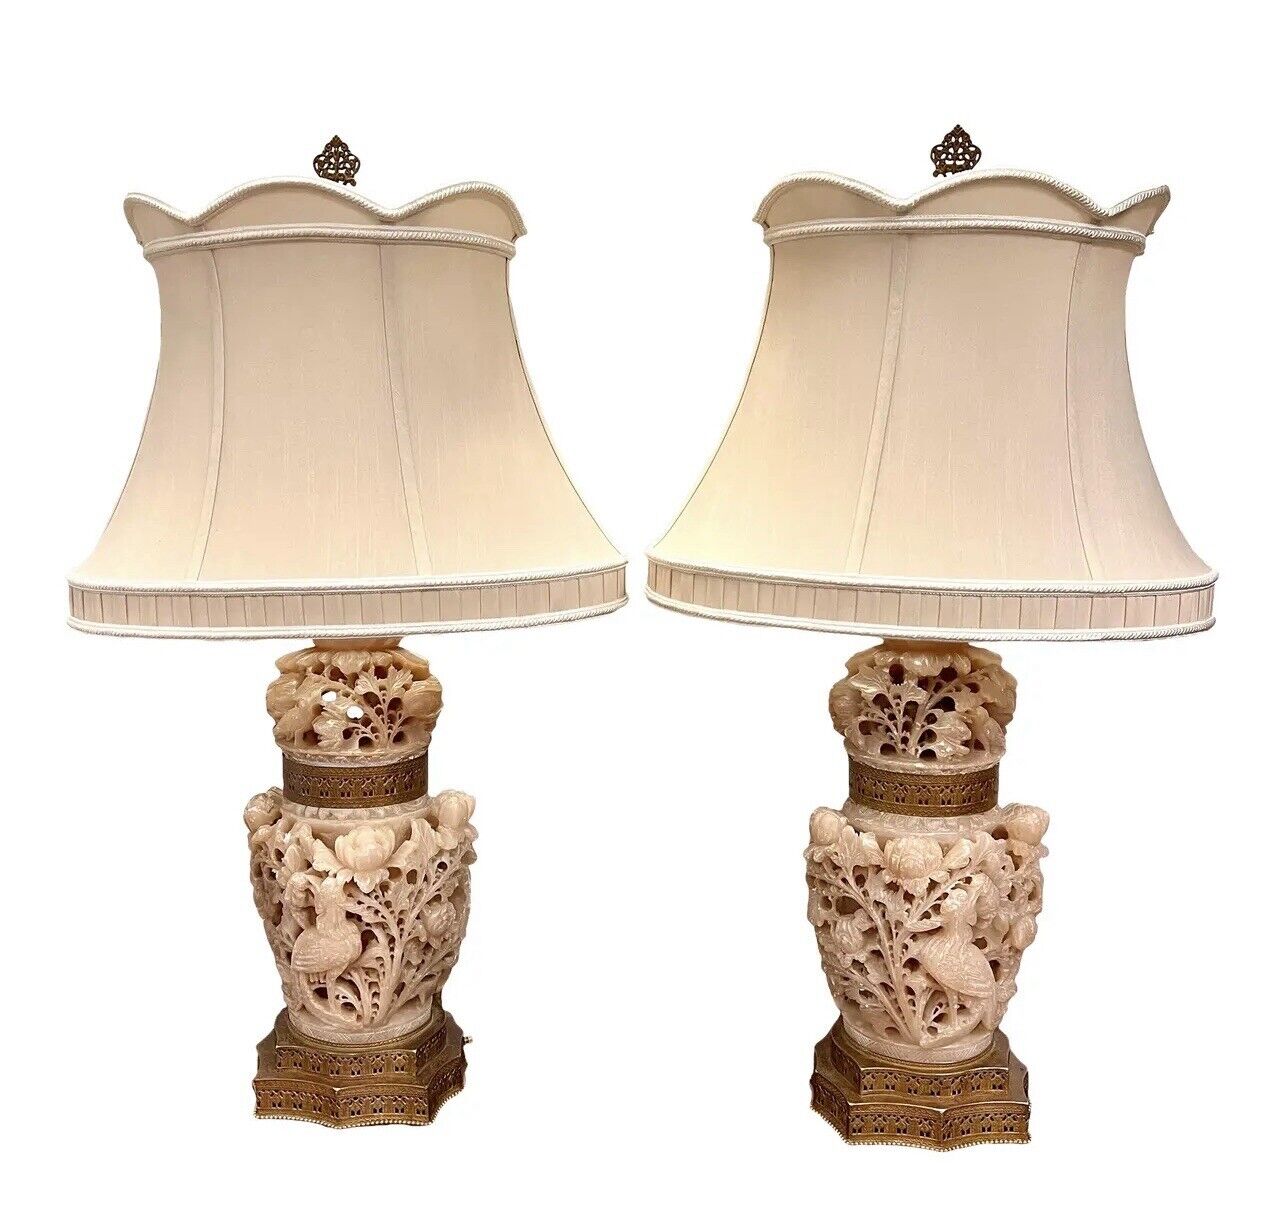 Magnificent Pair of Chinese Carved Removable Soapstone Urn Lamps with Shades